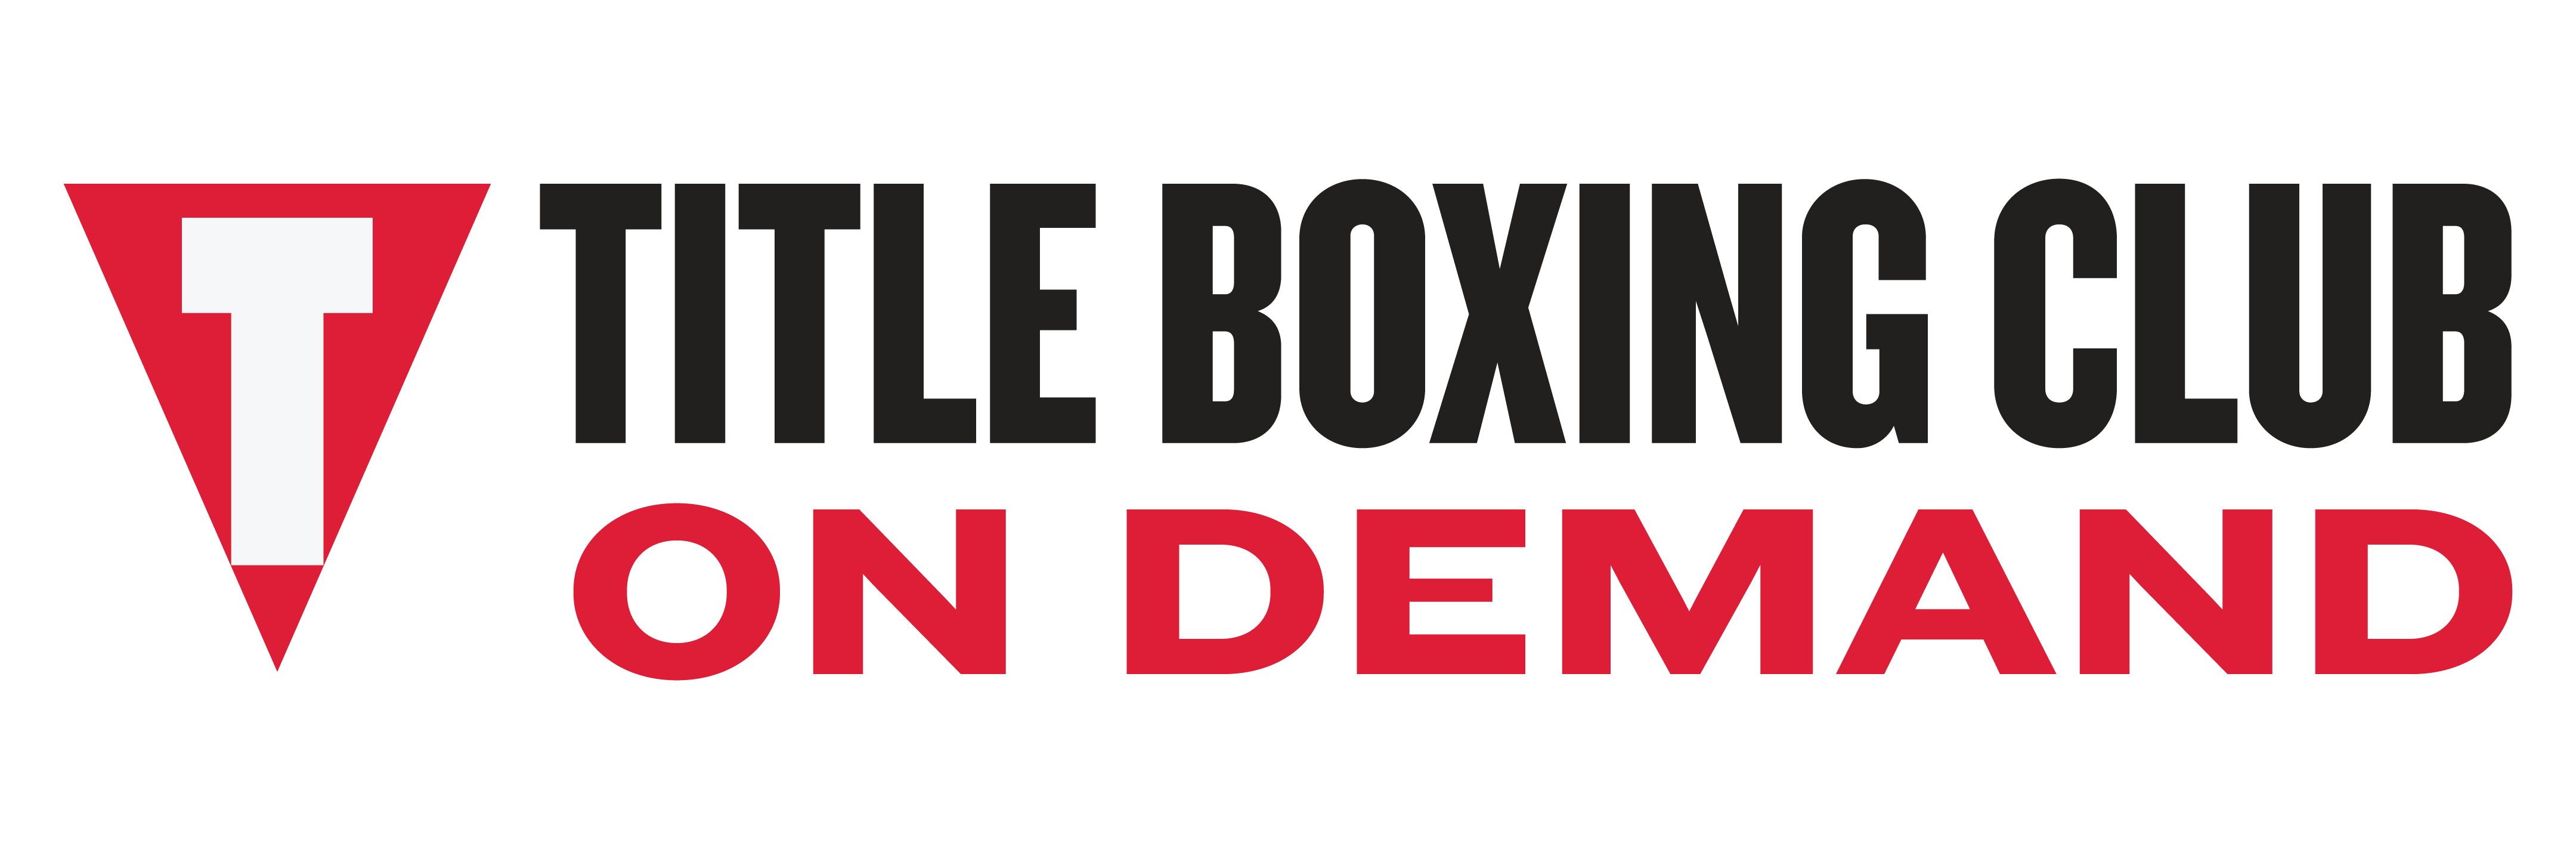 At Home Boxing Workouts Title Boxing Club On Demand